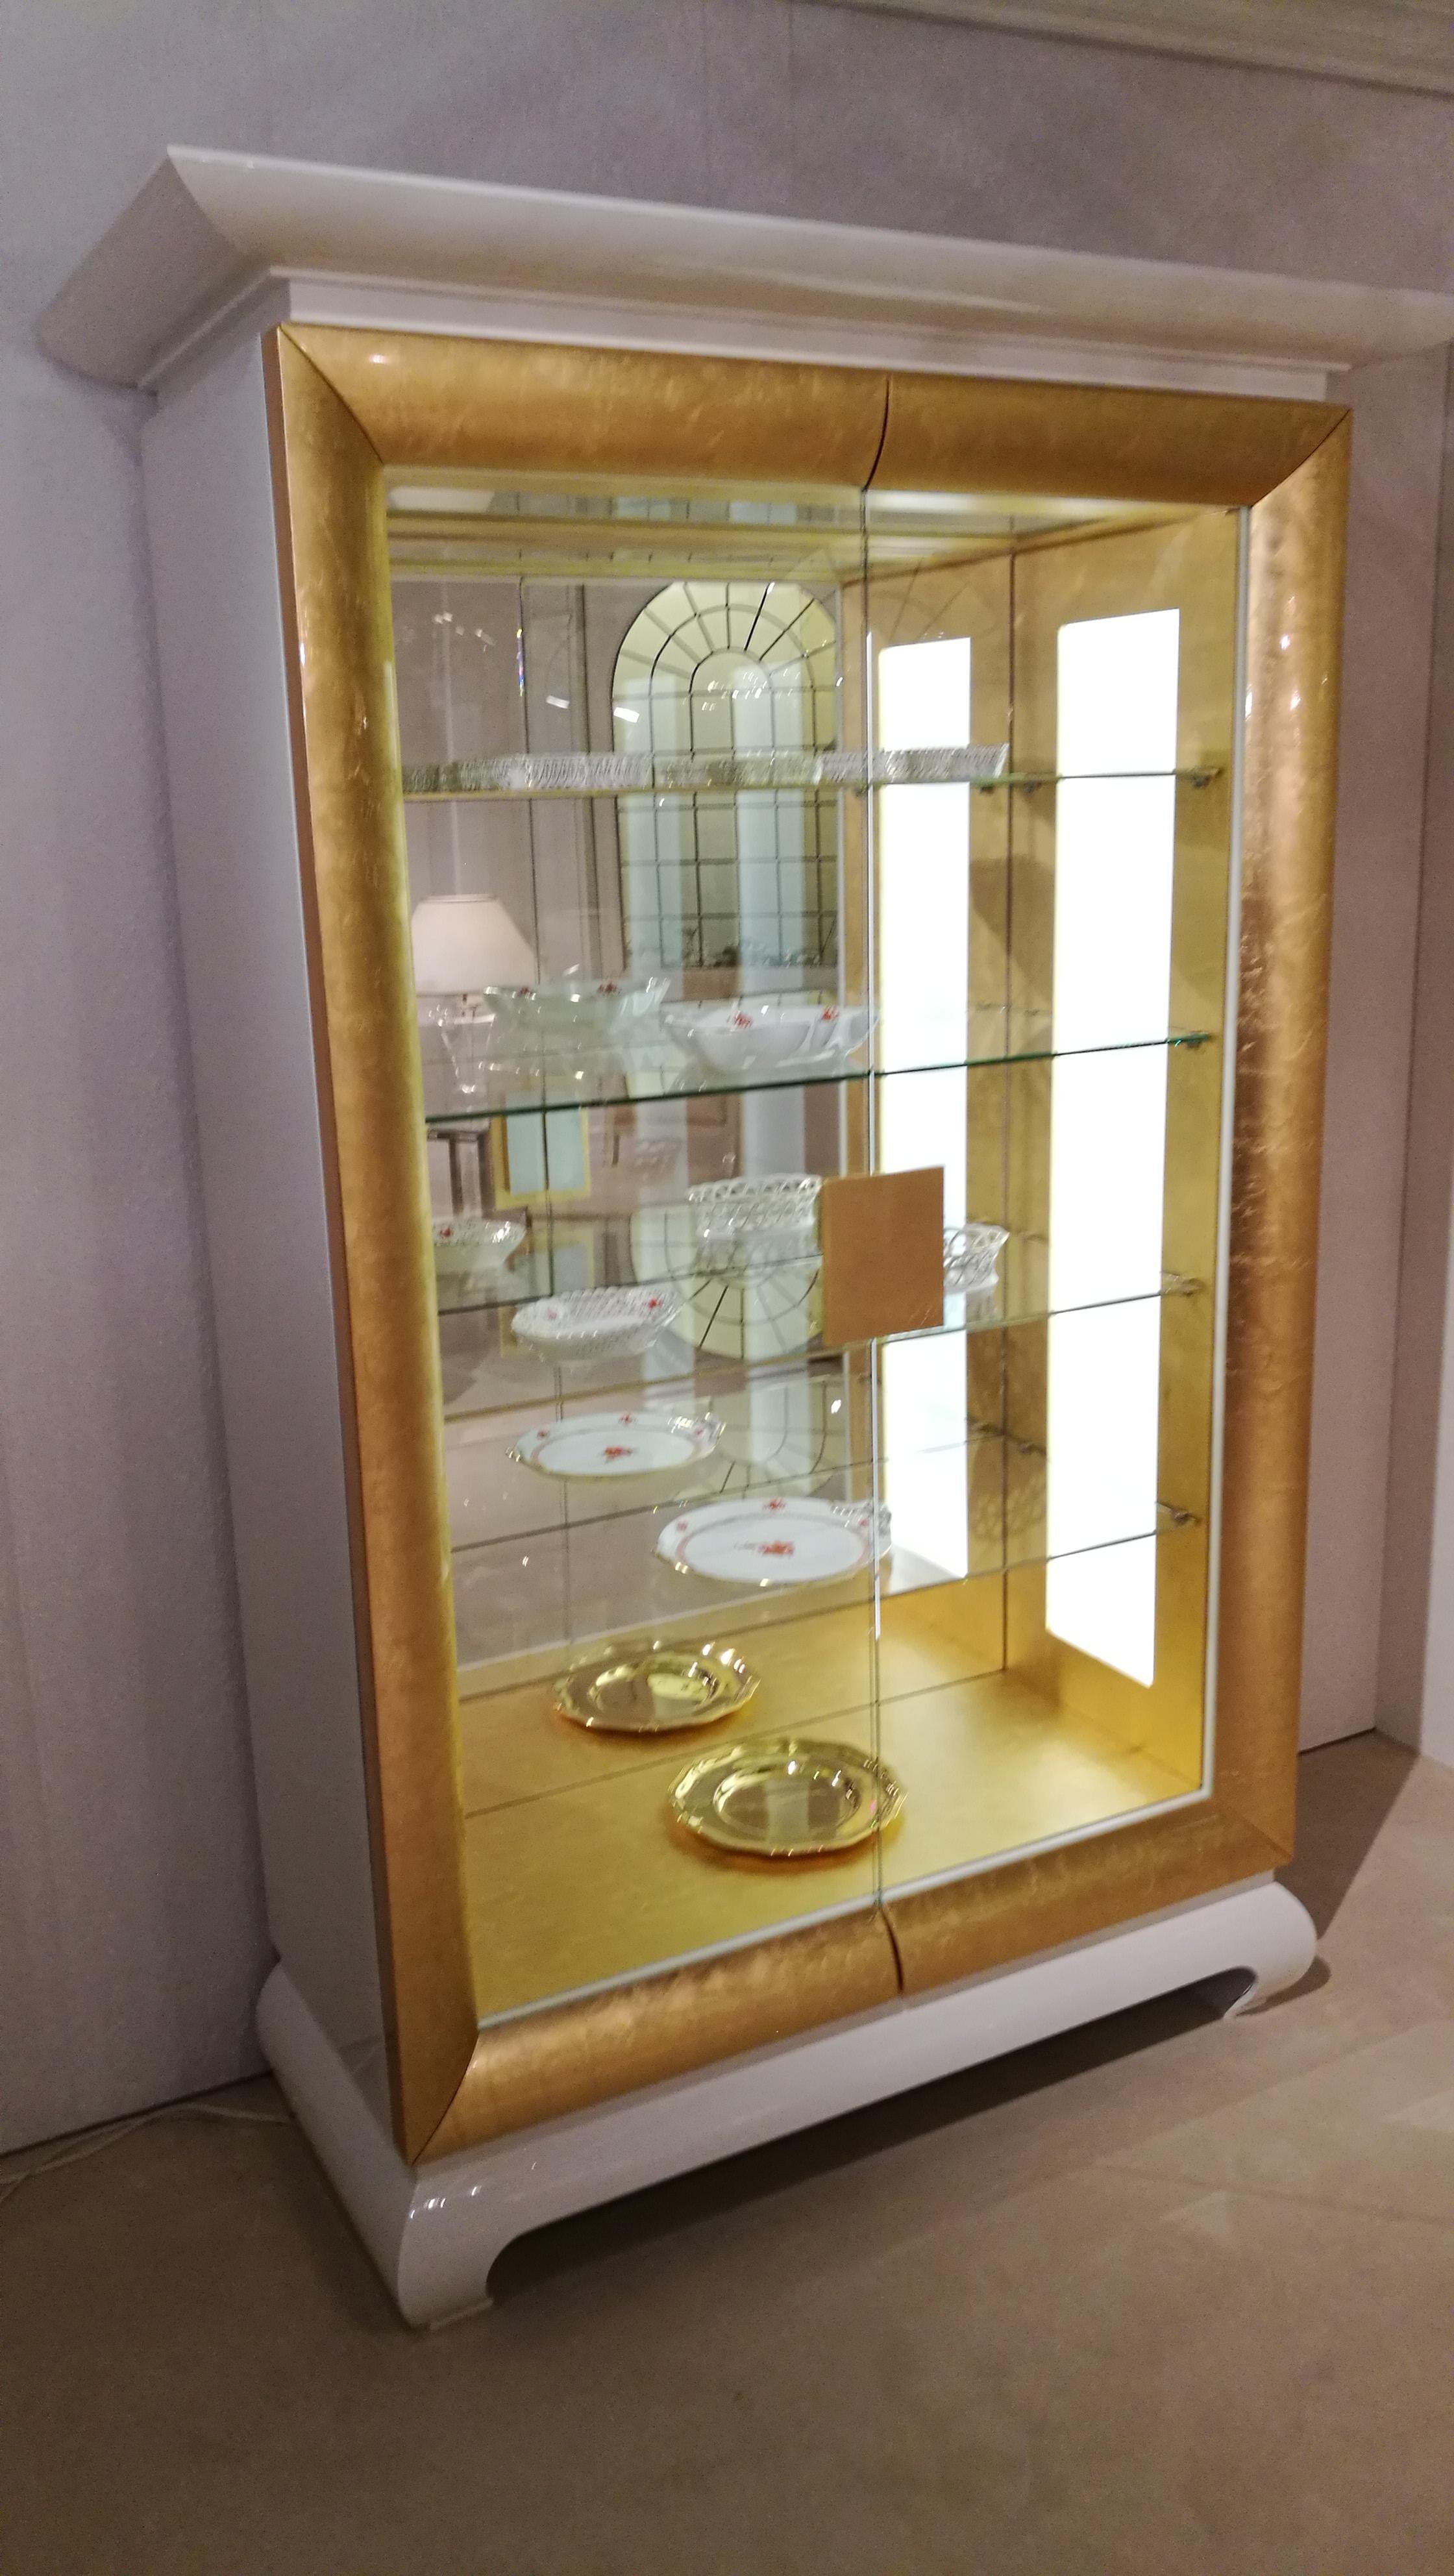 Stunning white and gold design vitrine with glass shelves and smooth interior lighting. The exterior is finished in high gloss white and high gloss gold paintjobs while the interior got lacquered in a beautiful matte gold. On the interior you will